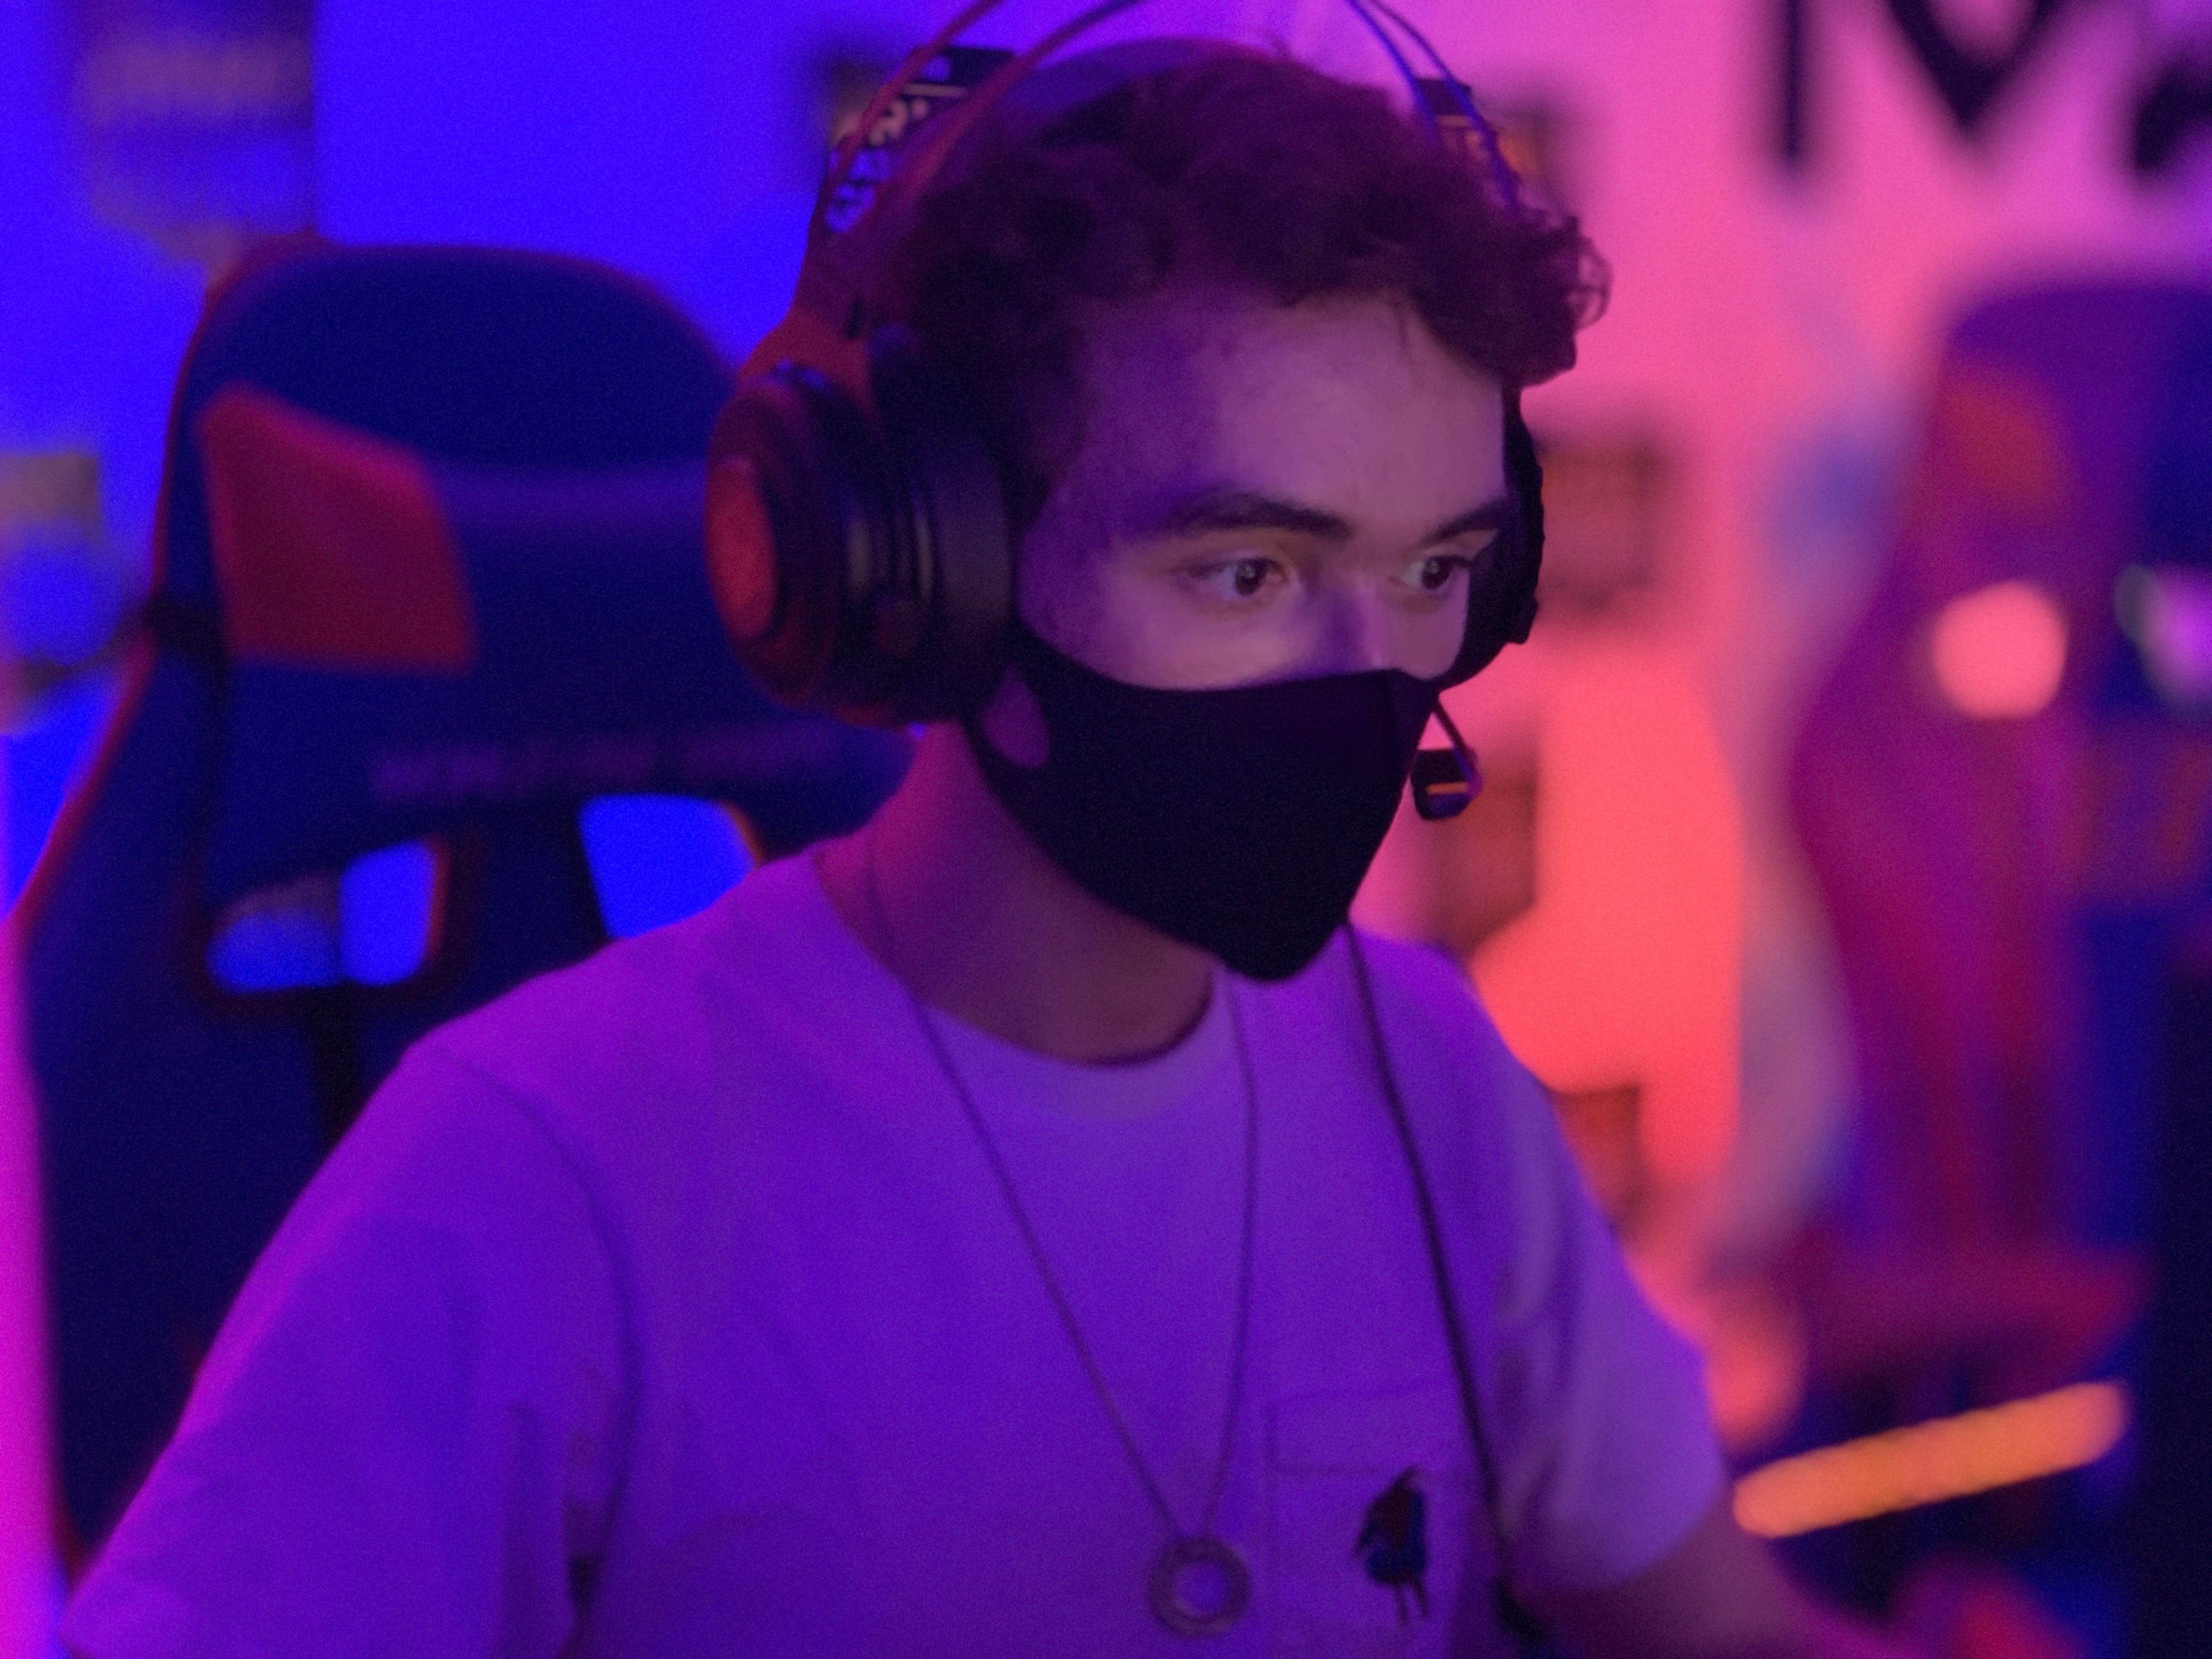 gamer wearing a headset and face mask